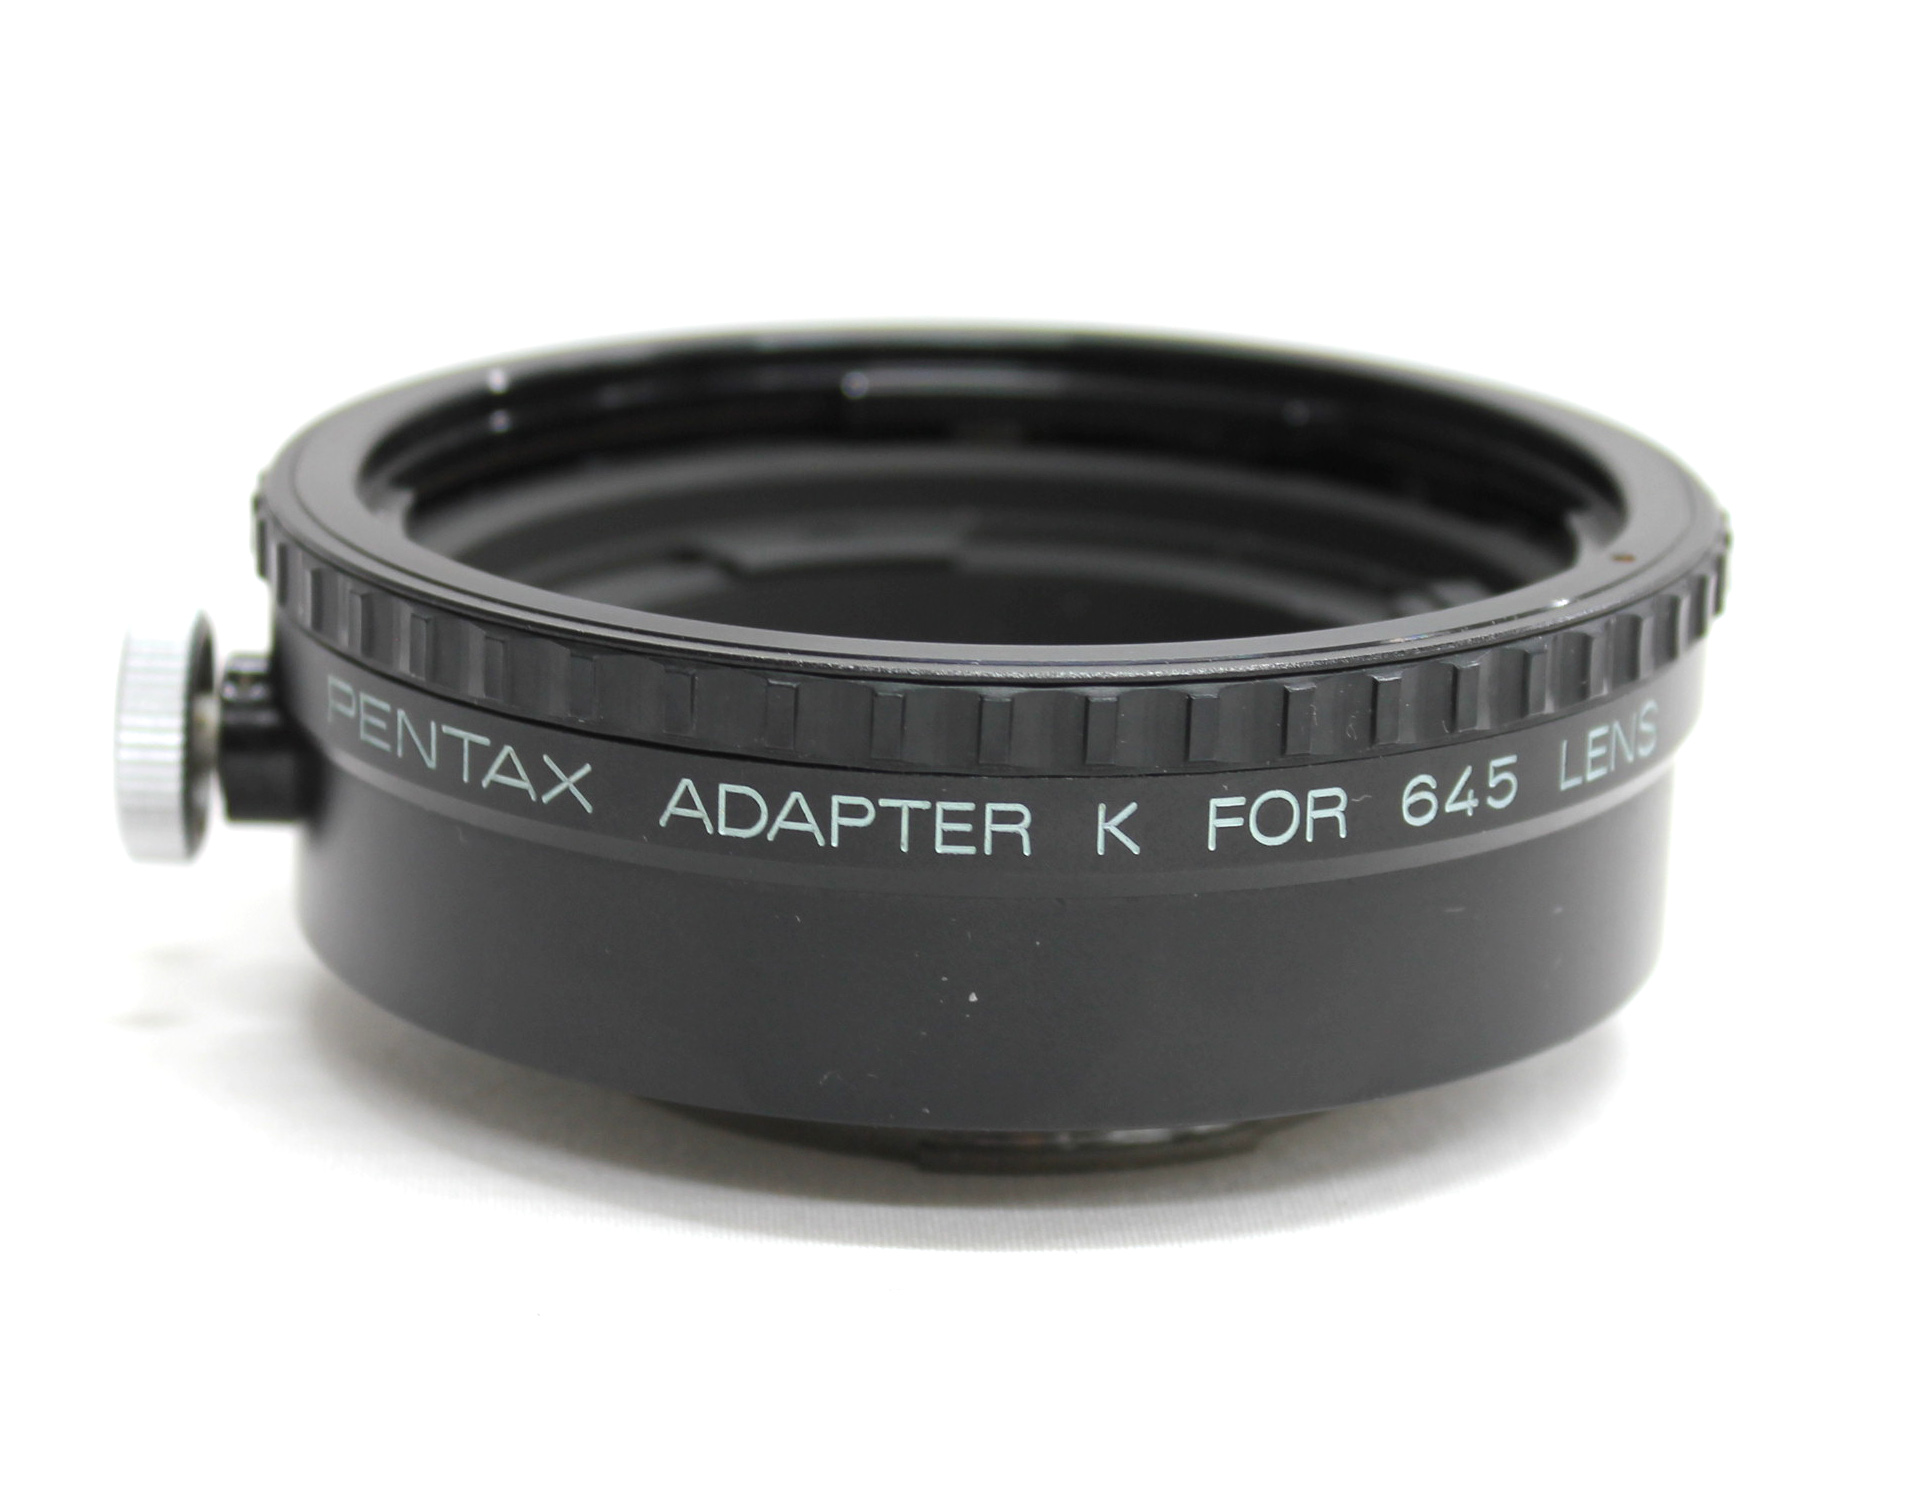 Japan Used Camera Shop | [Excellent+++++] Pentax Adapter K for Pentax 645 Lens from Japan